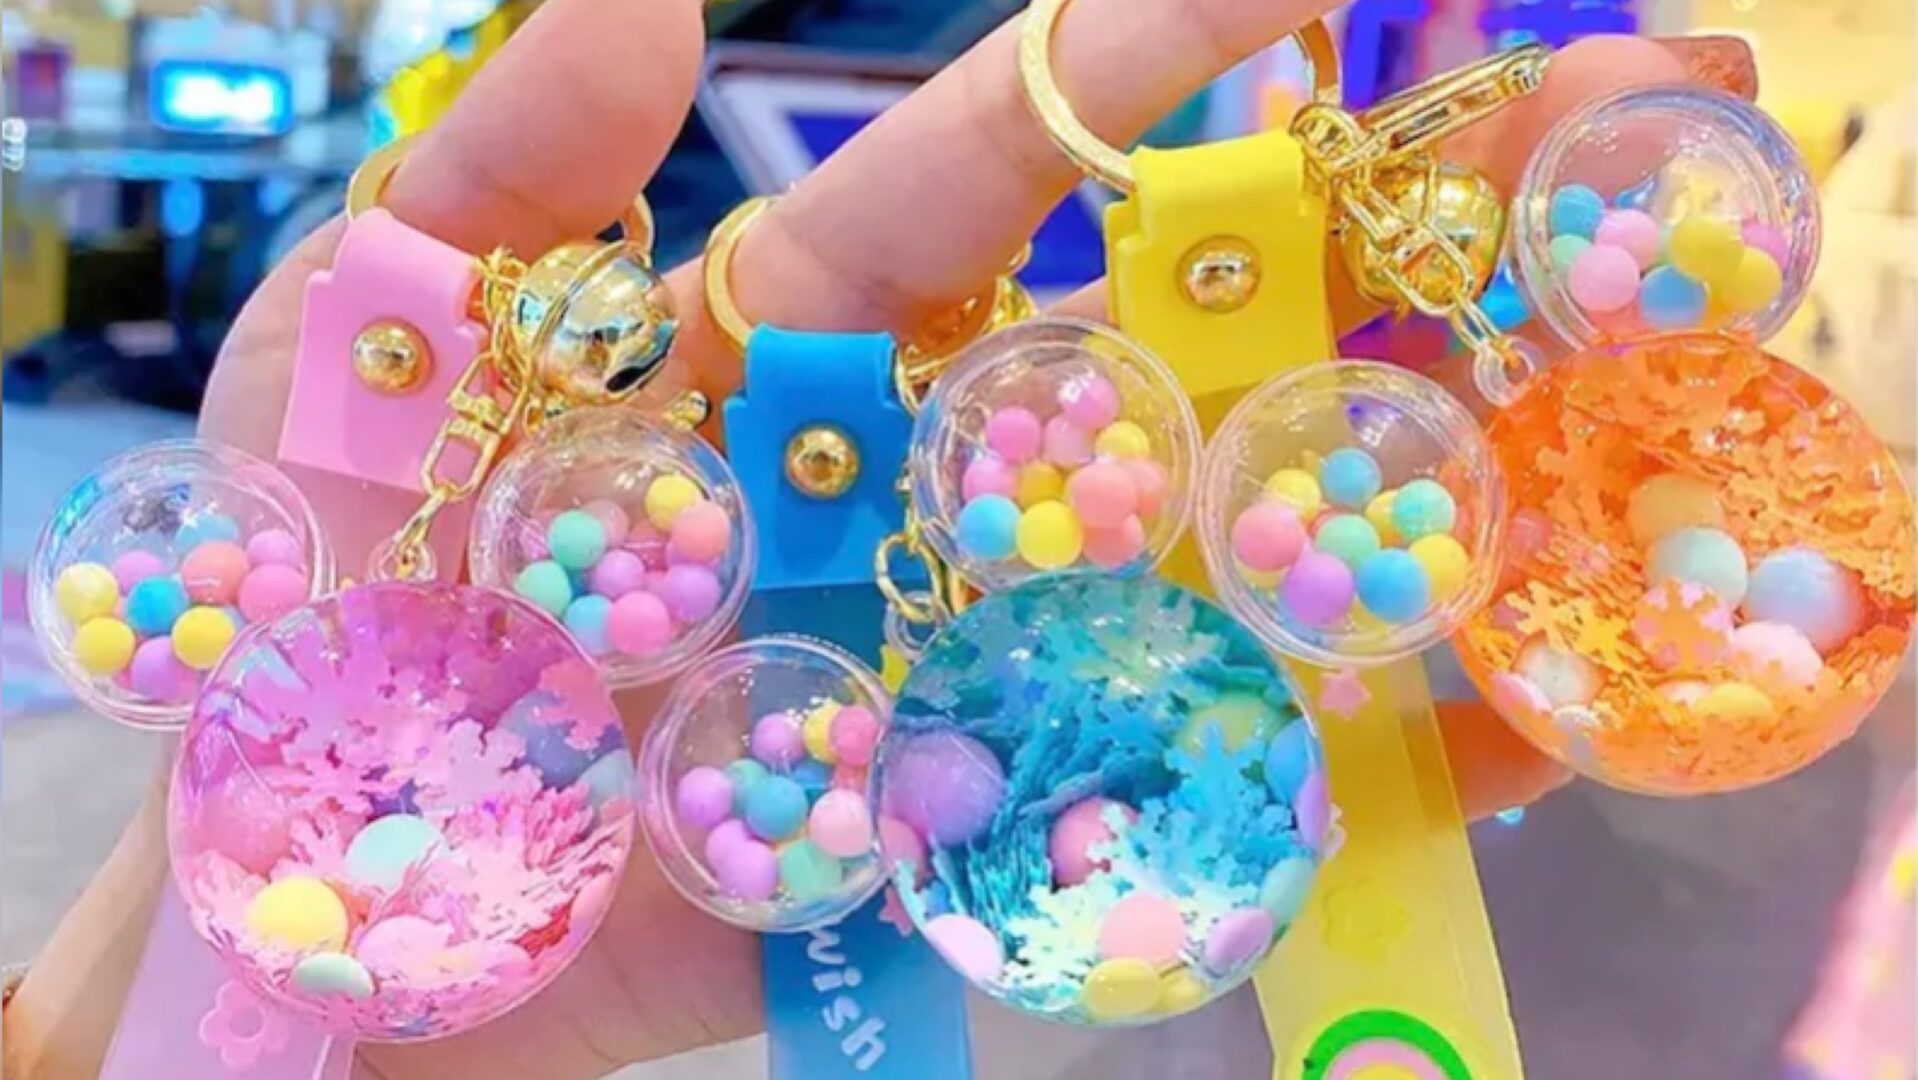 Colorful And Fun Mickey Mouse Keychains To Add To Your Keys!